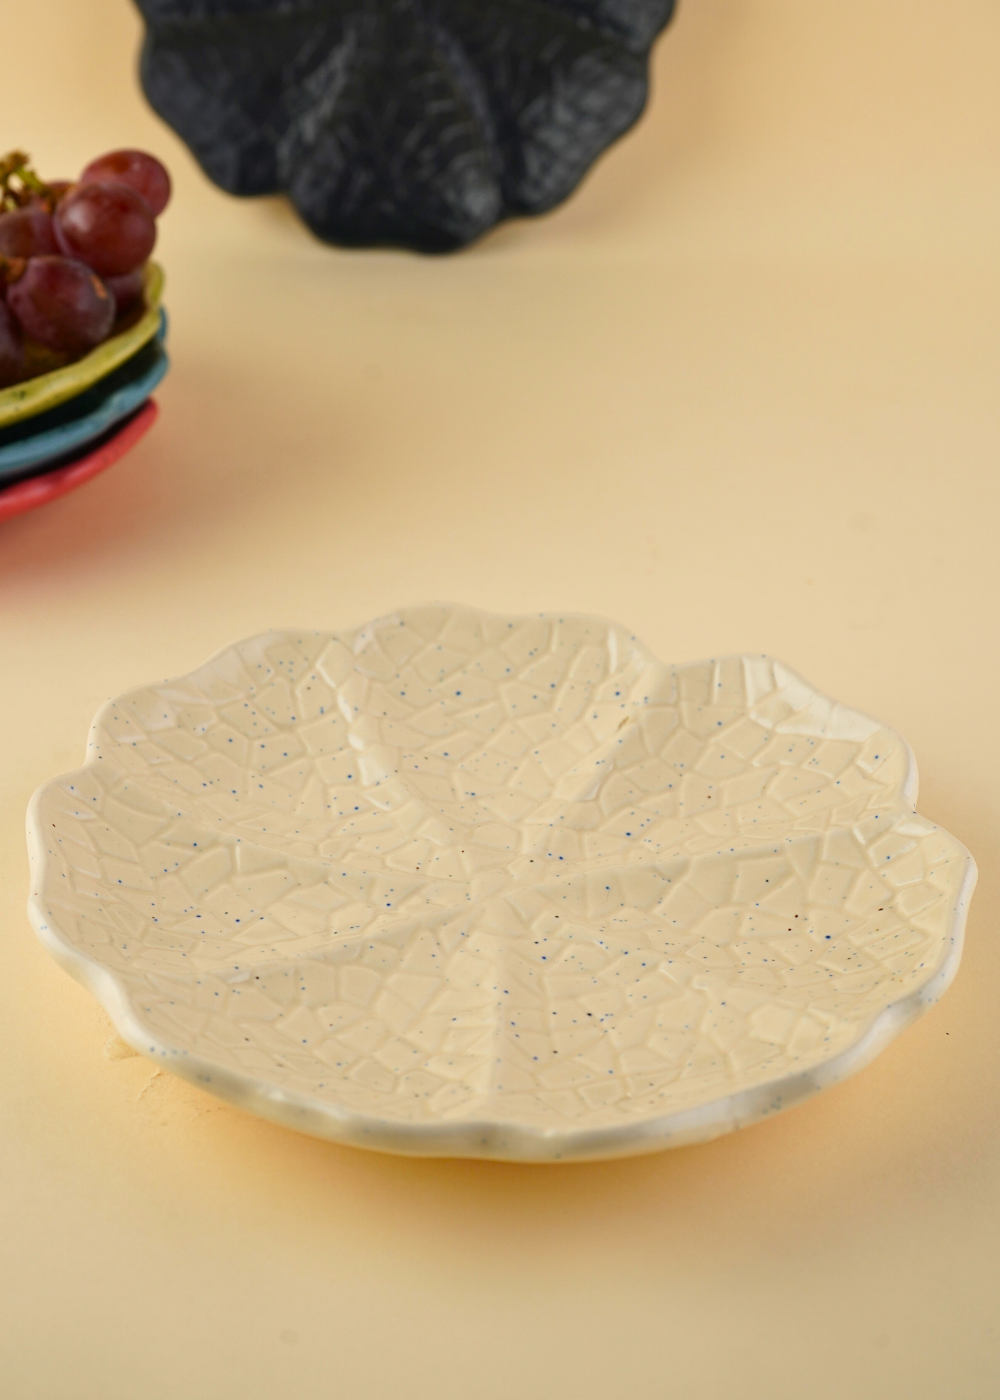 white cabbage snack plate with cabbage leaf design